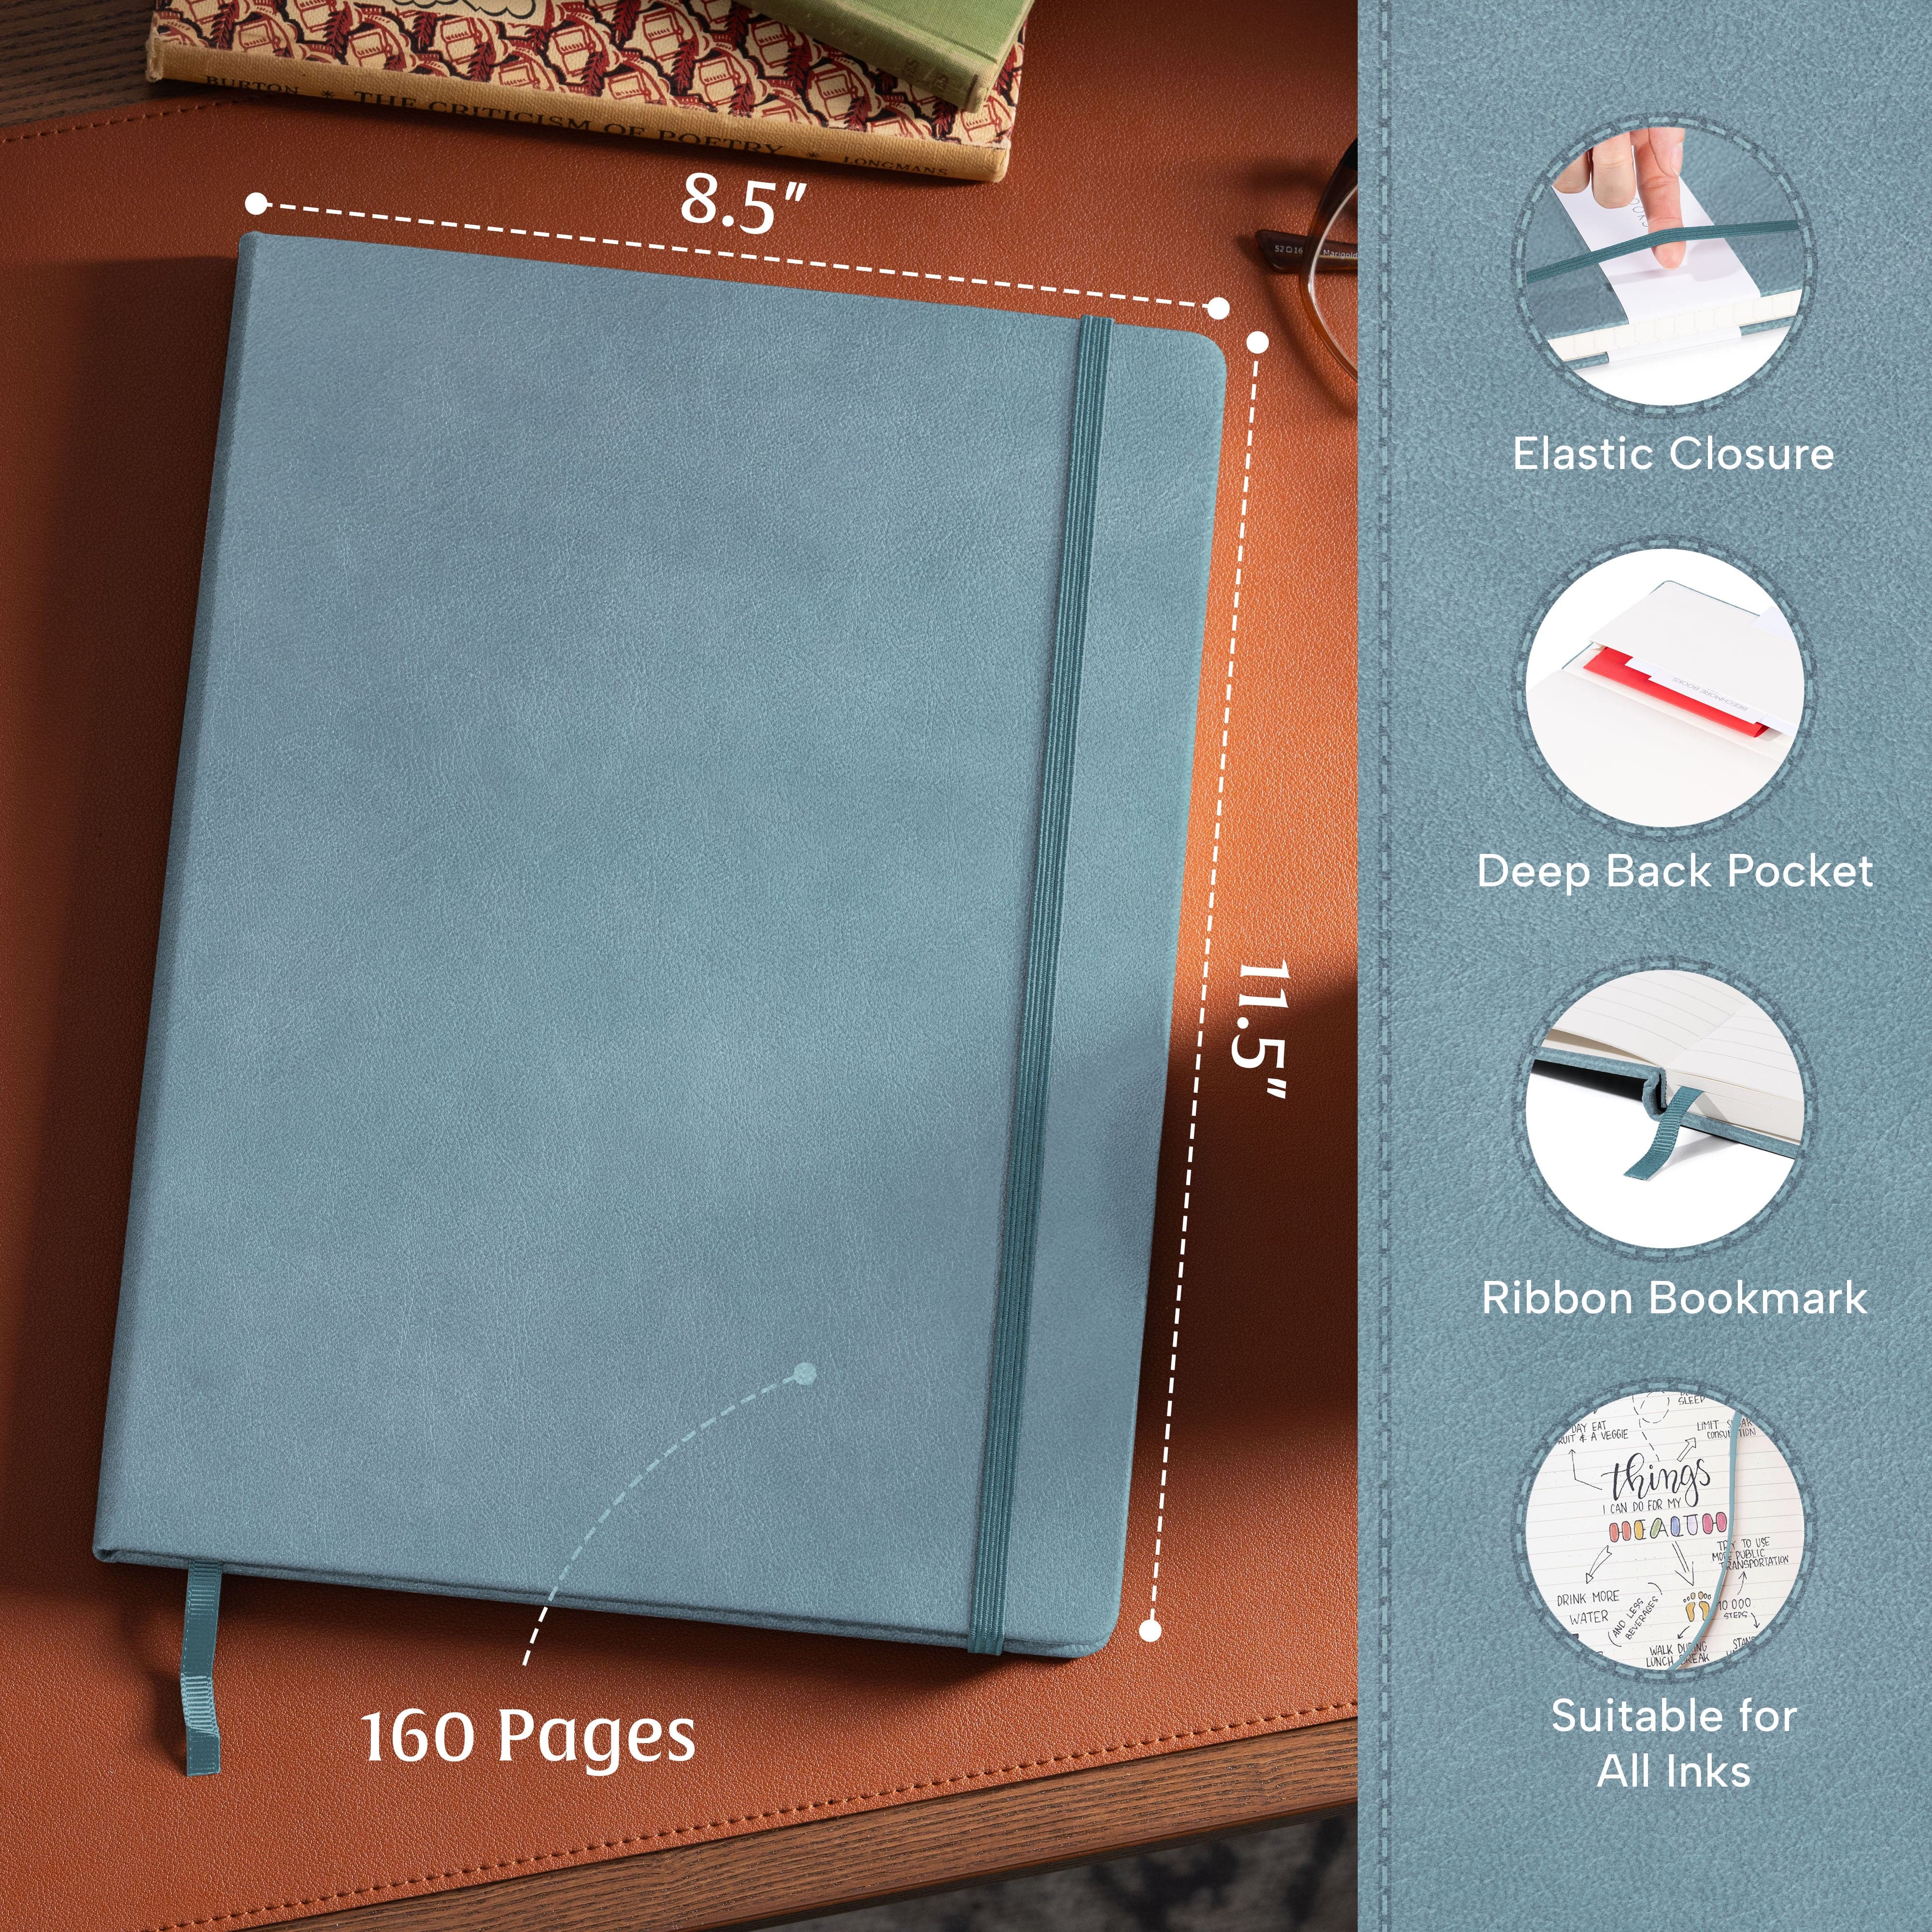 Beechmore's Arctic Teal A4 Ruled Notebook is a tribute to those who appreciate the beauty in organization, offering crisp, lined pages.